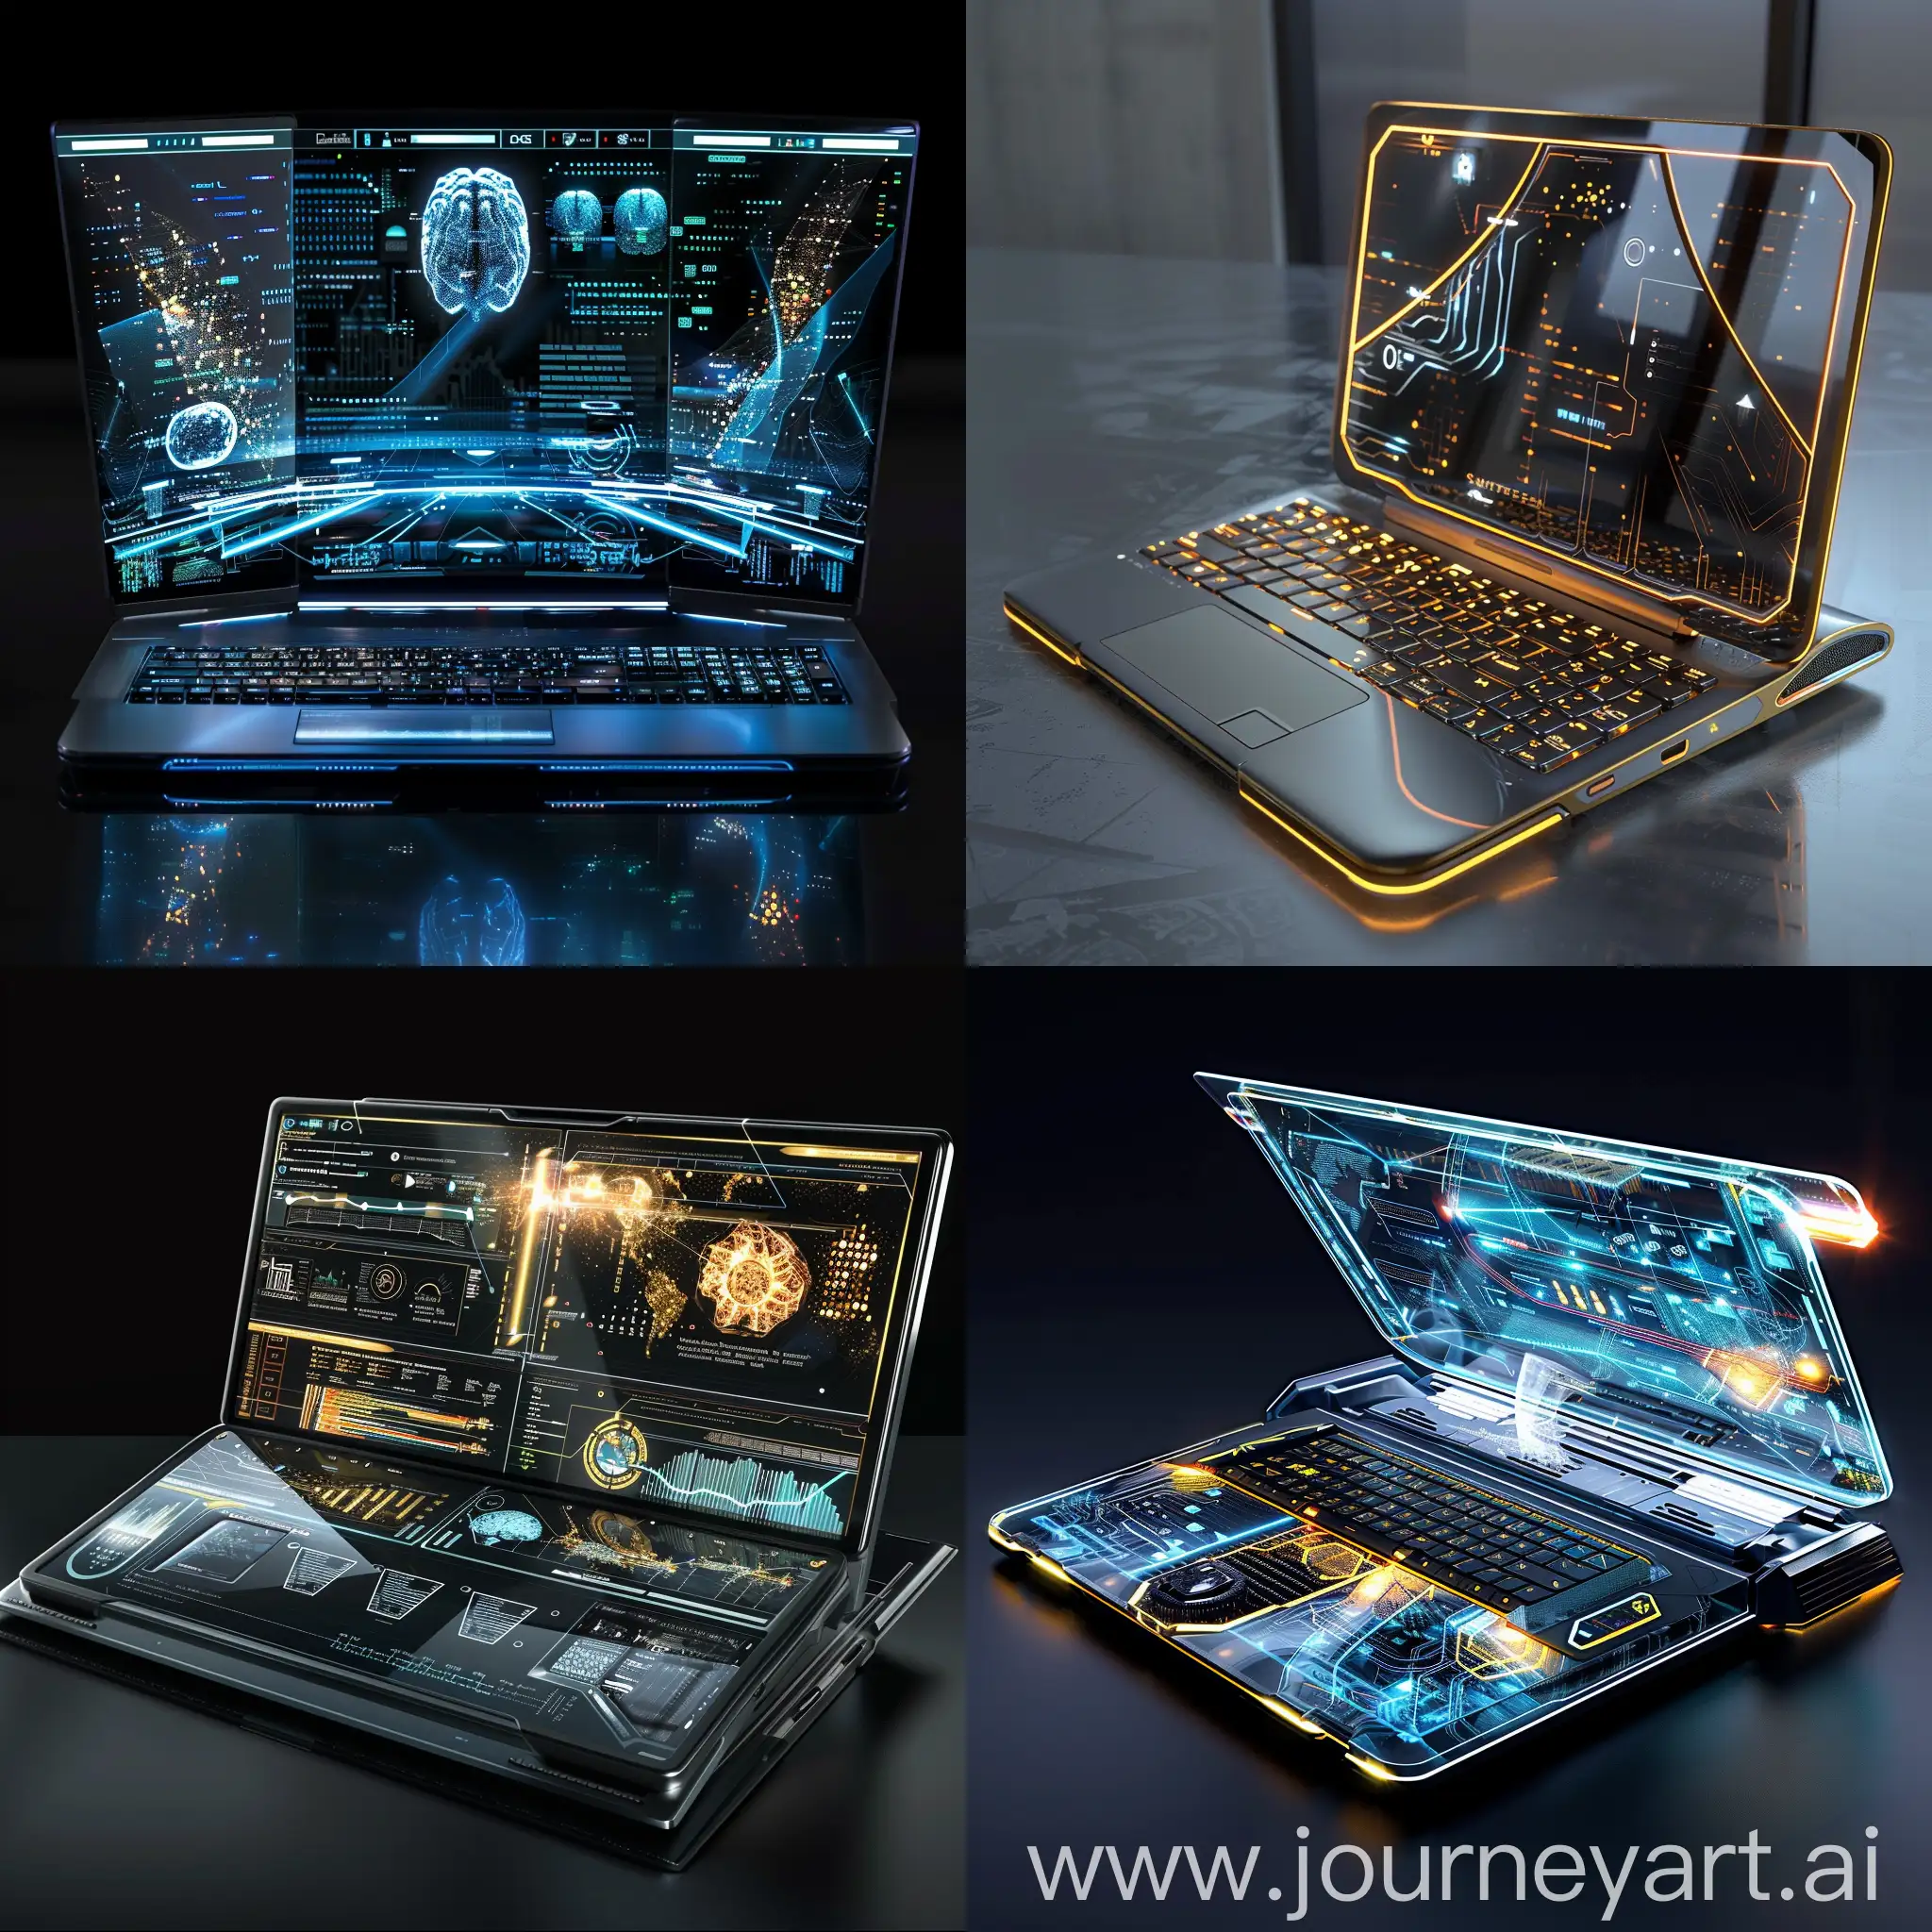 Futuristic-Laptop-with-Modular-Components-and-Flexible-Displays